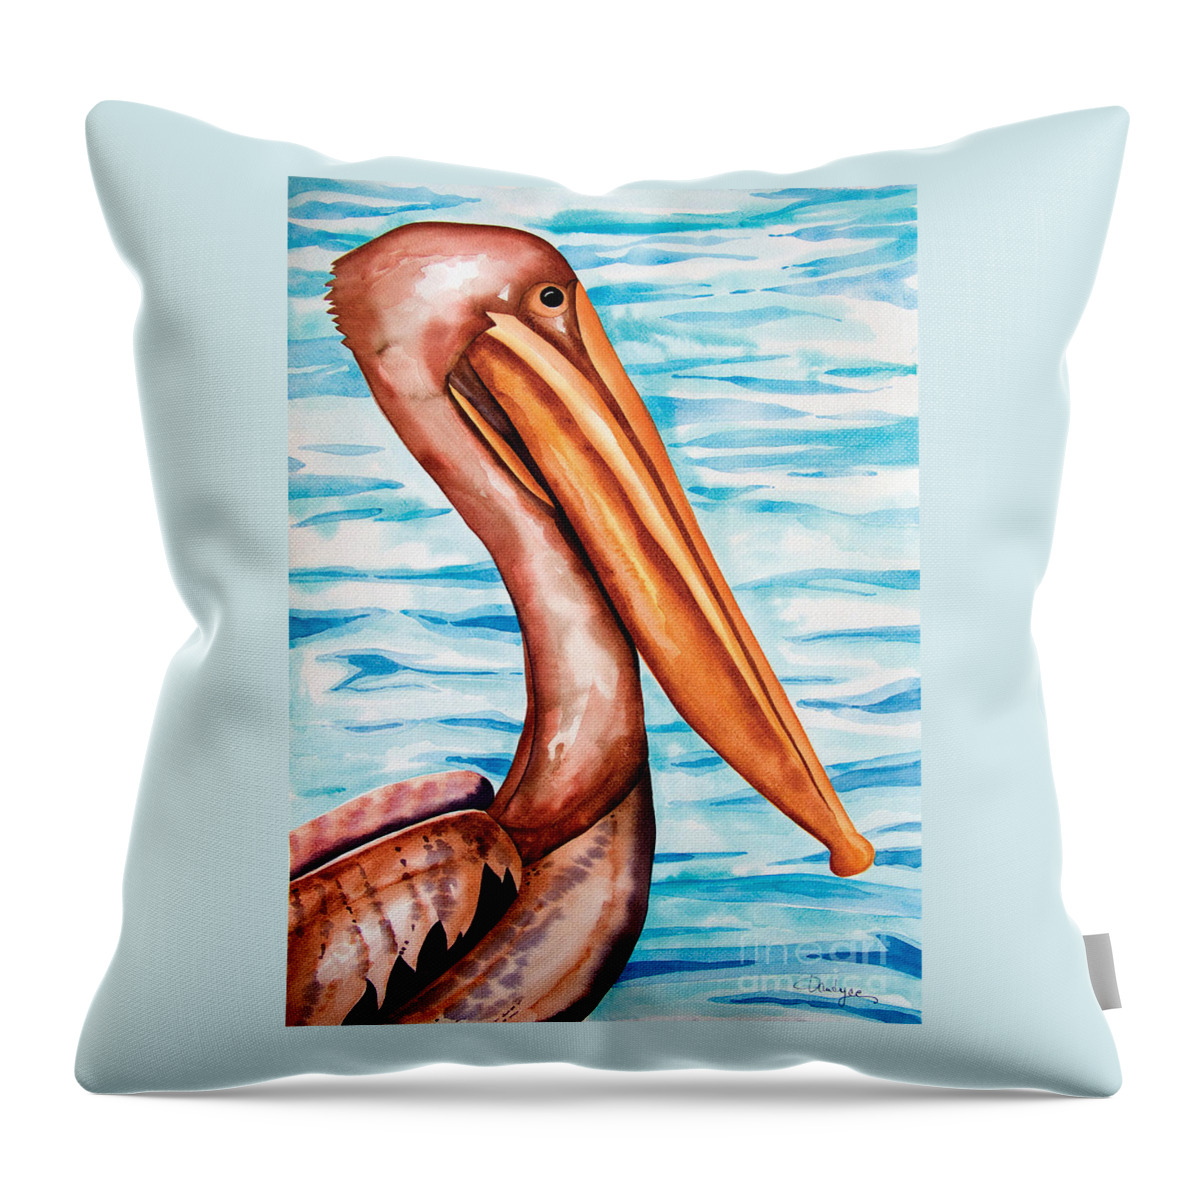 Brown Pelican Throw Pillow featuring the painting Brown Pelican Portrait by Kandyce Waltensperger